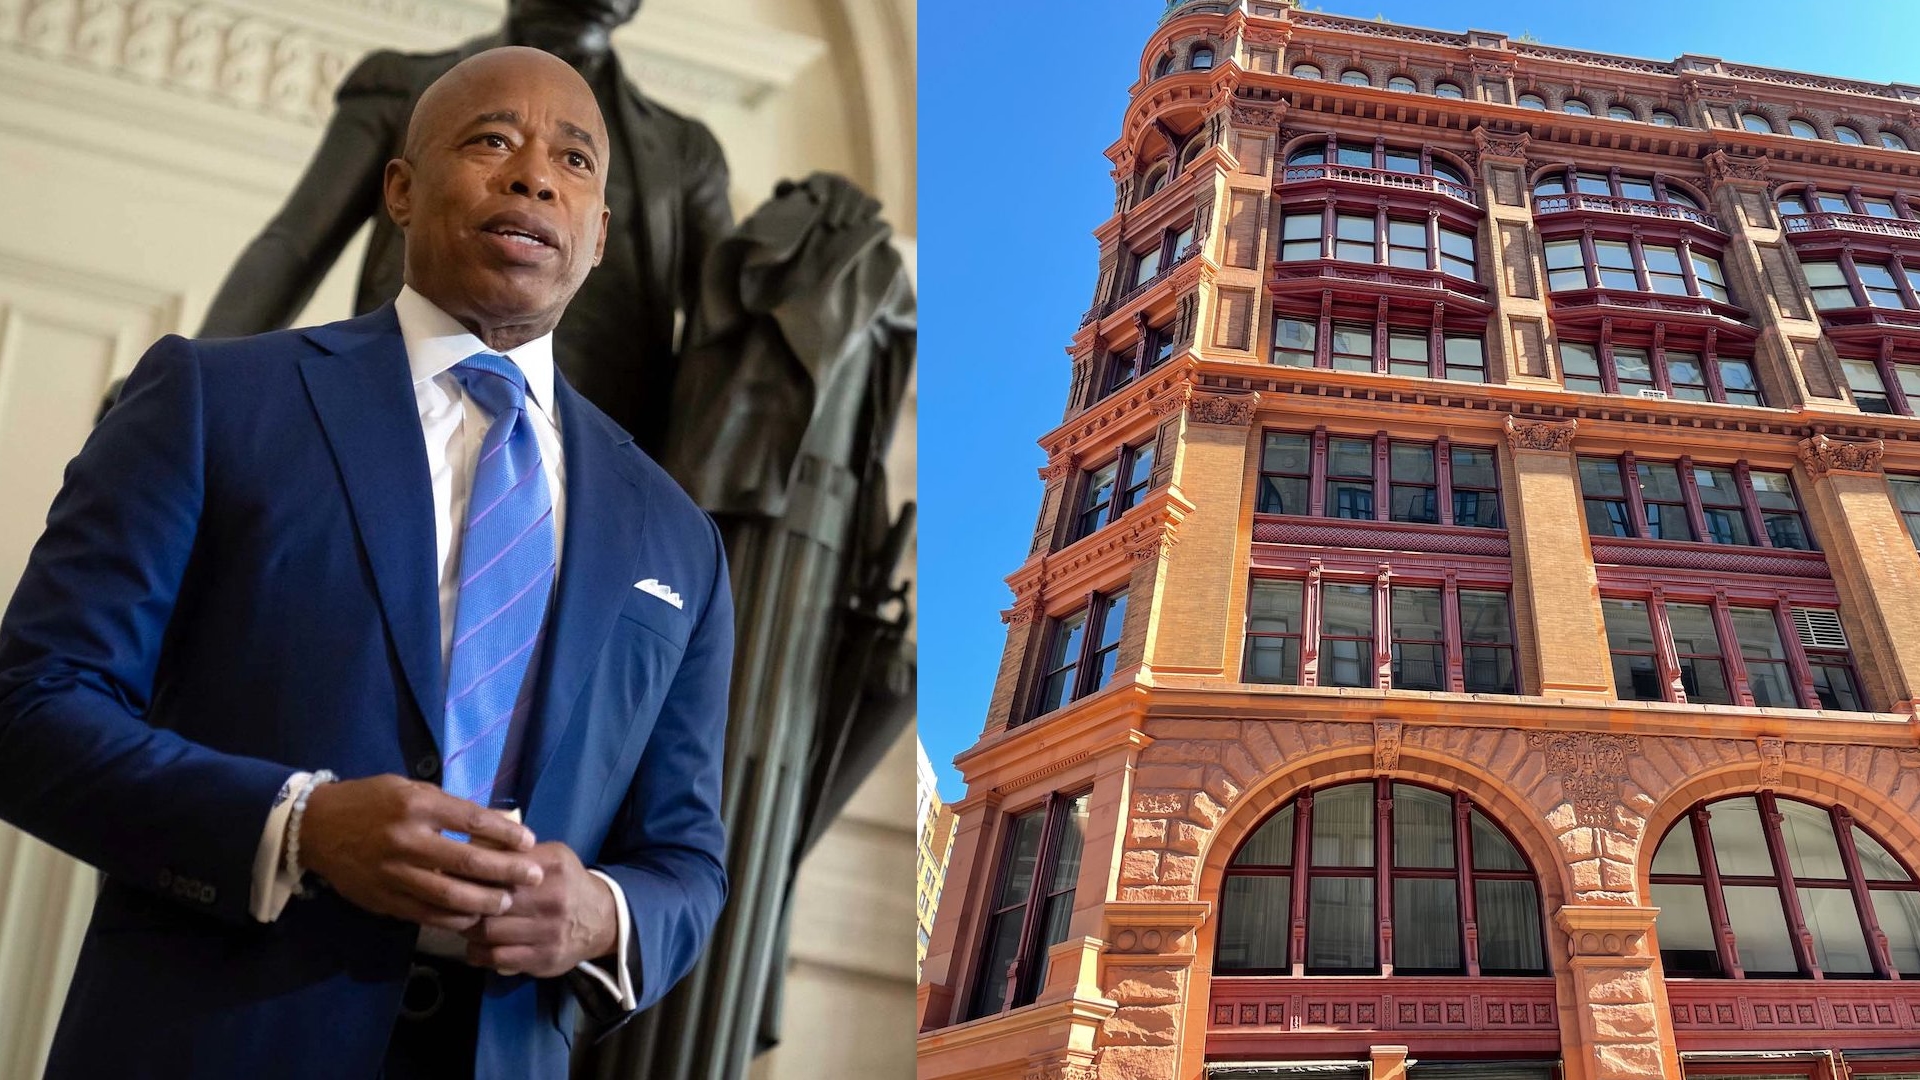 Two images: on the left, Mayor Eric Adams wears a suit and speaks to a crowd. On the right, an exterior of 644 Broadway, where the owner of Zero Bond and his wife recently purchased an apartment.